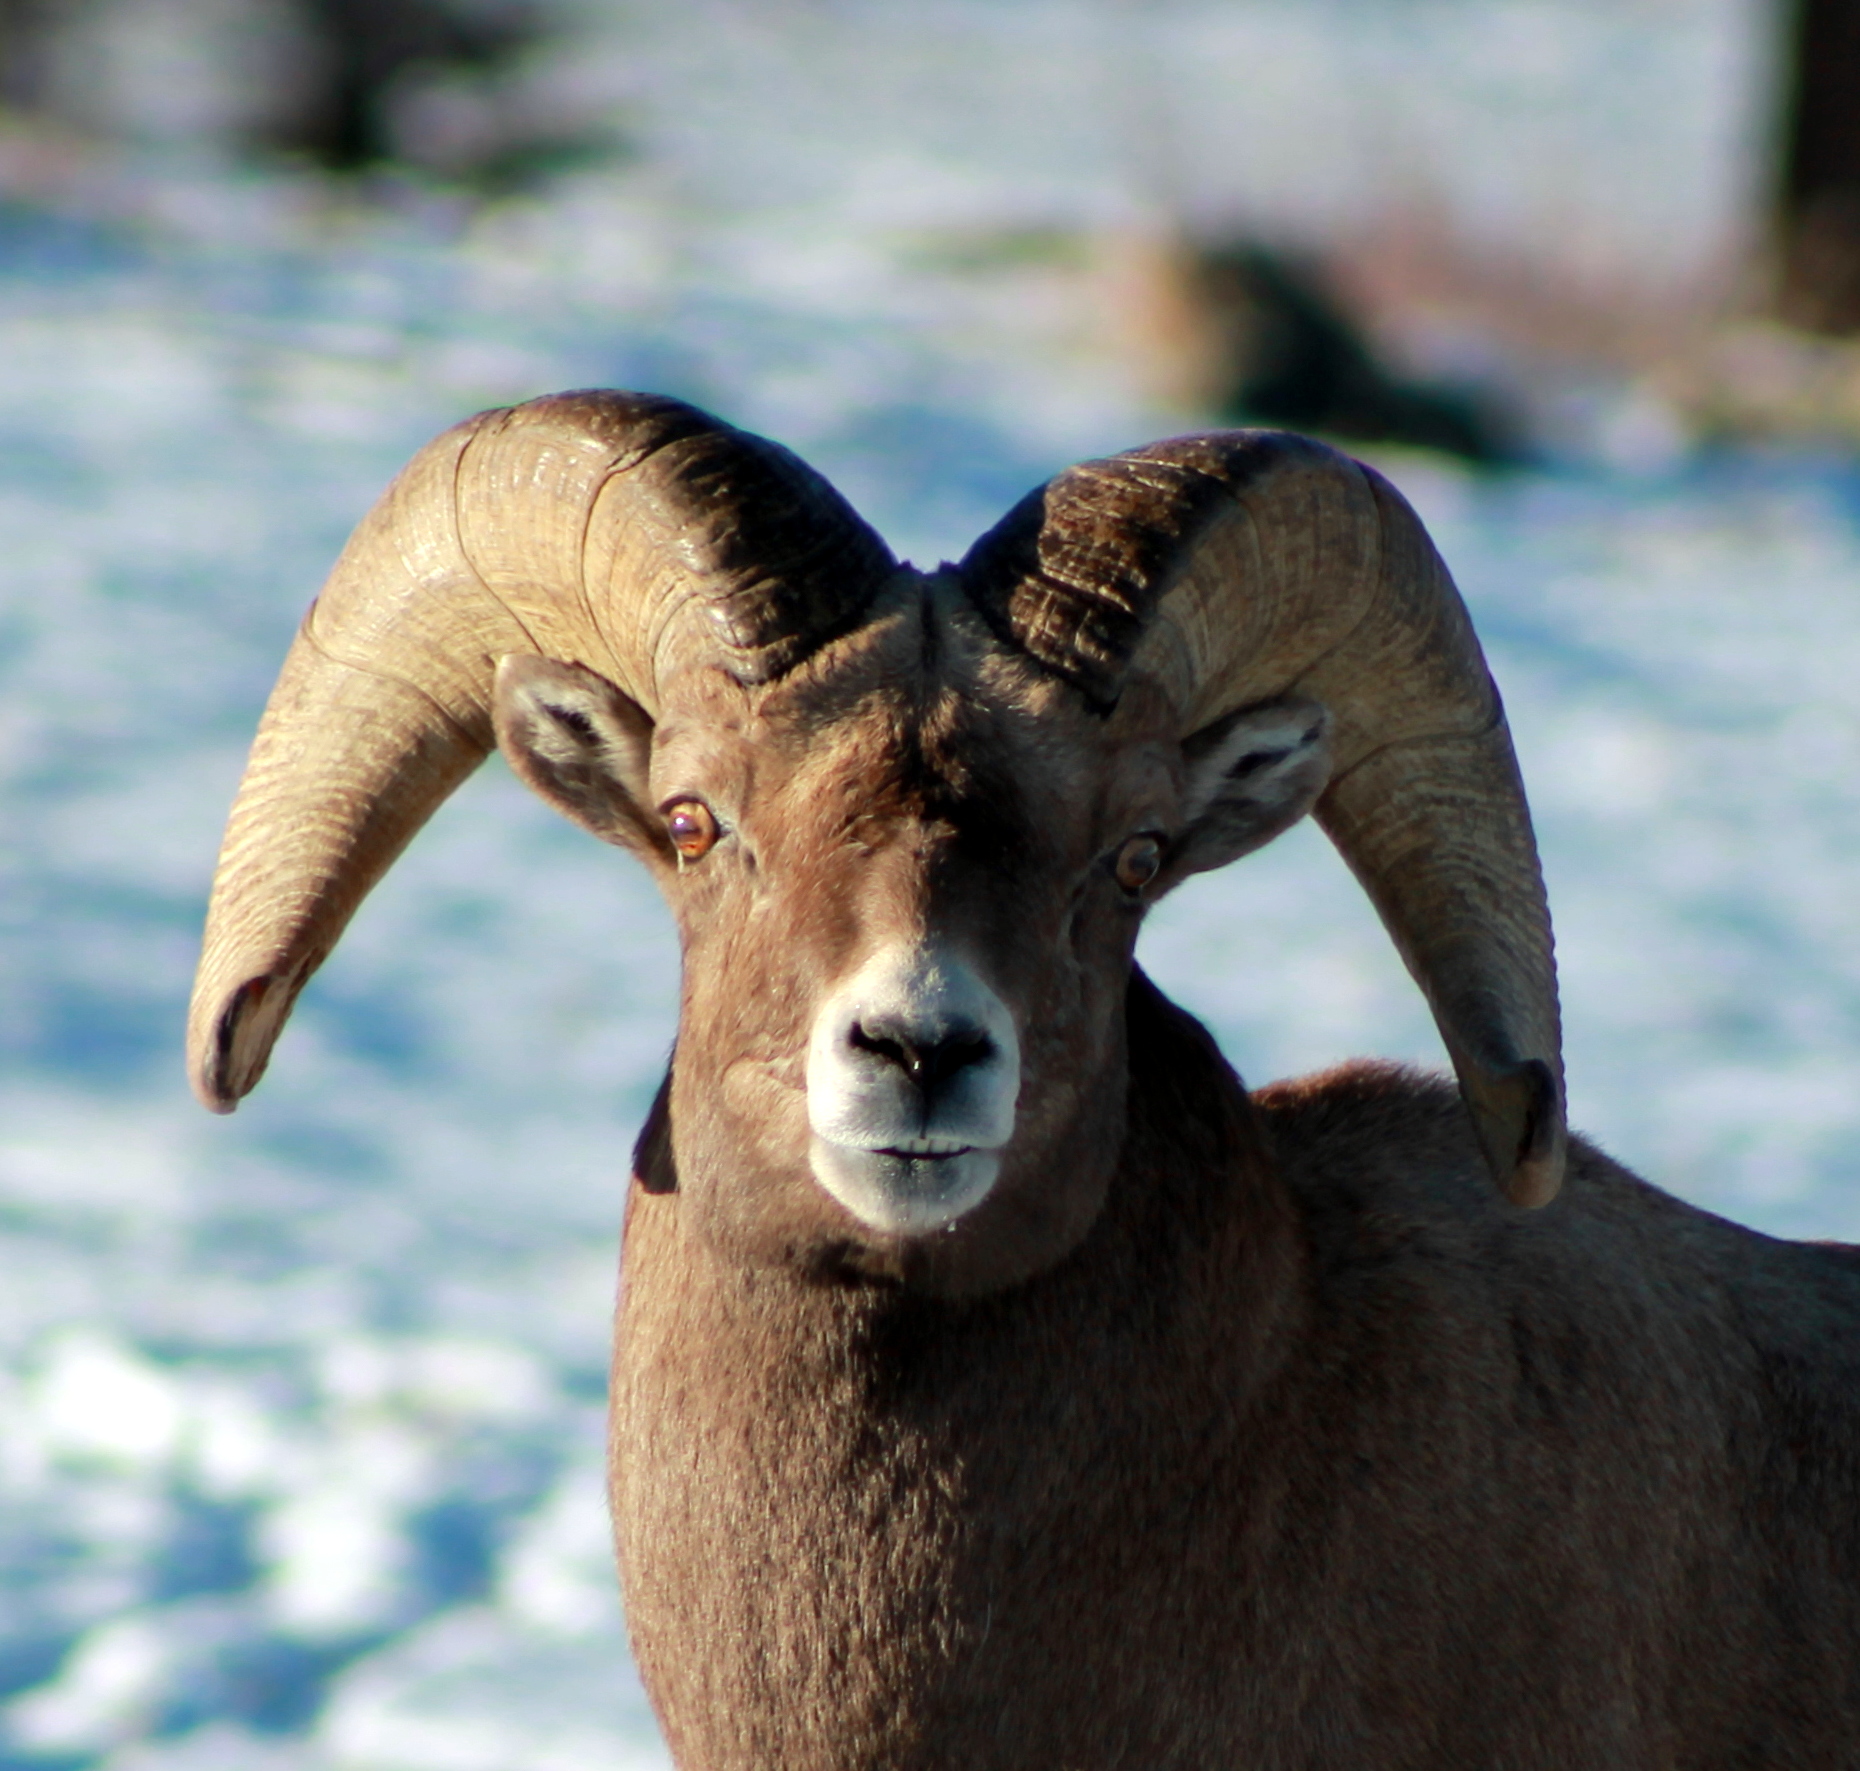 Bighorn sheep tours offer rare up-close viewing of elusive animals ...